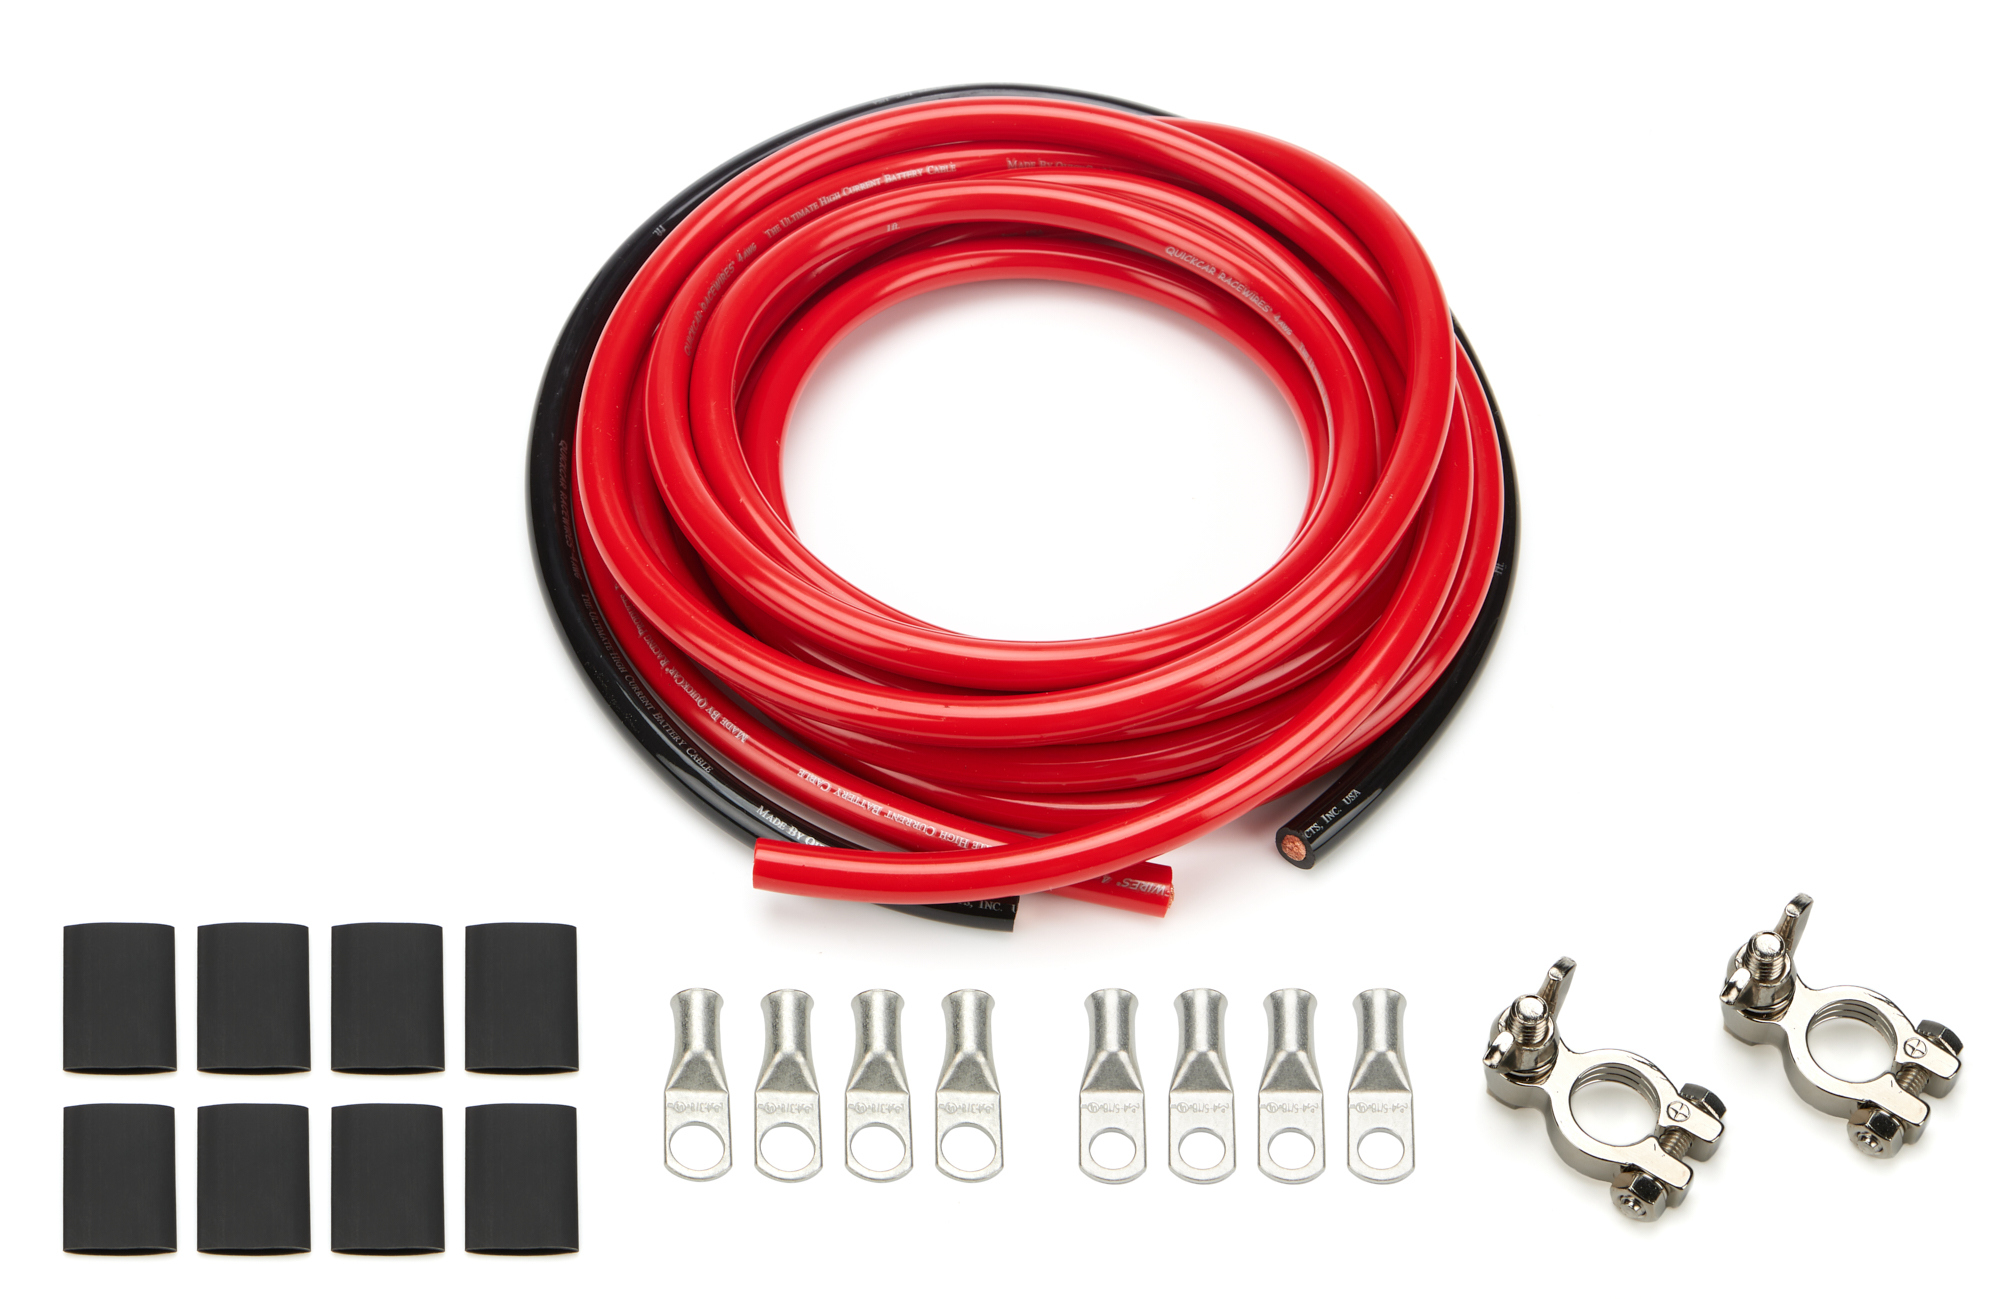 Top Mount 4 AWG Battery Cable Kit 57-009